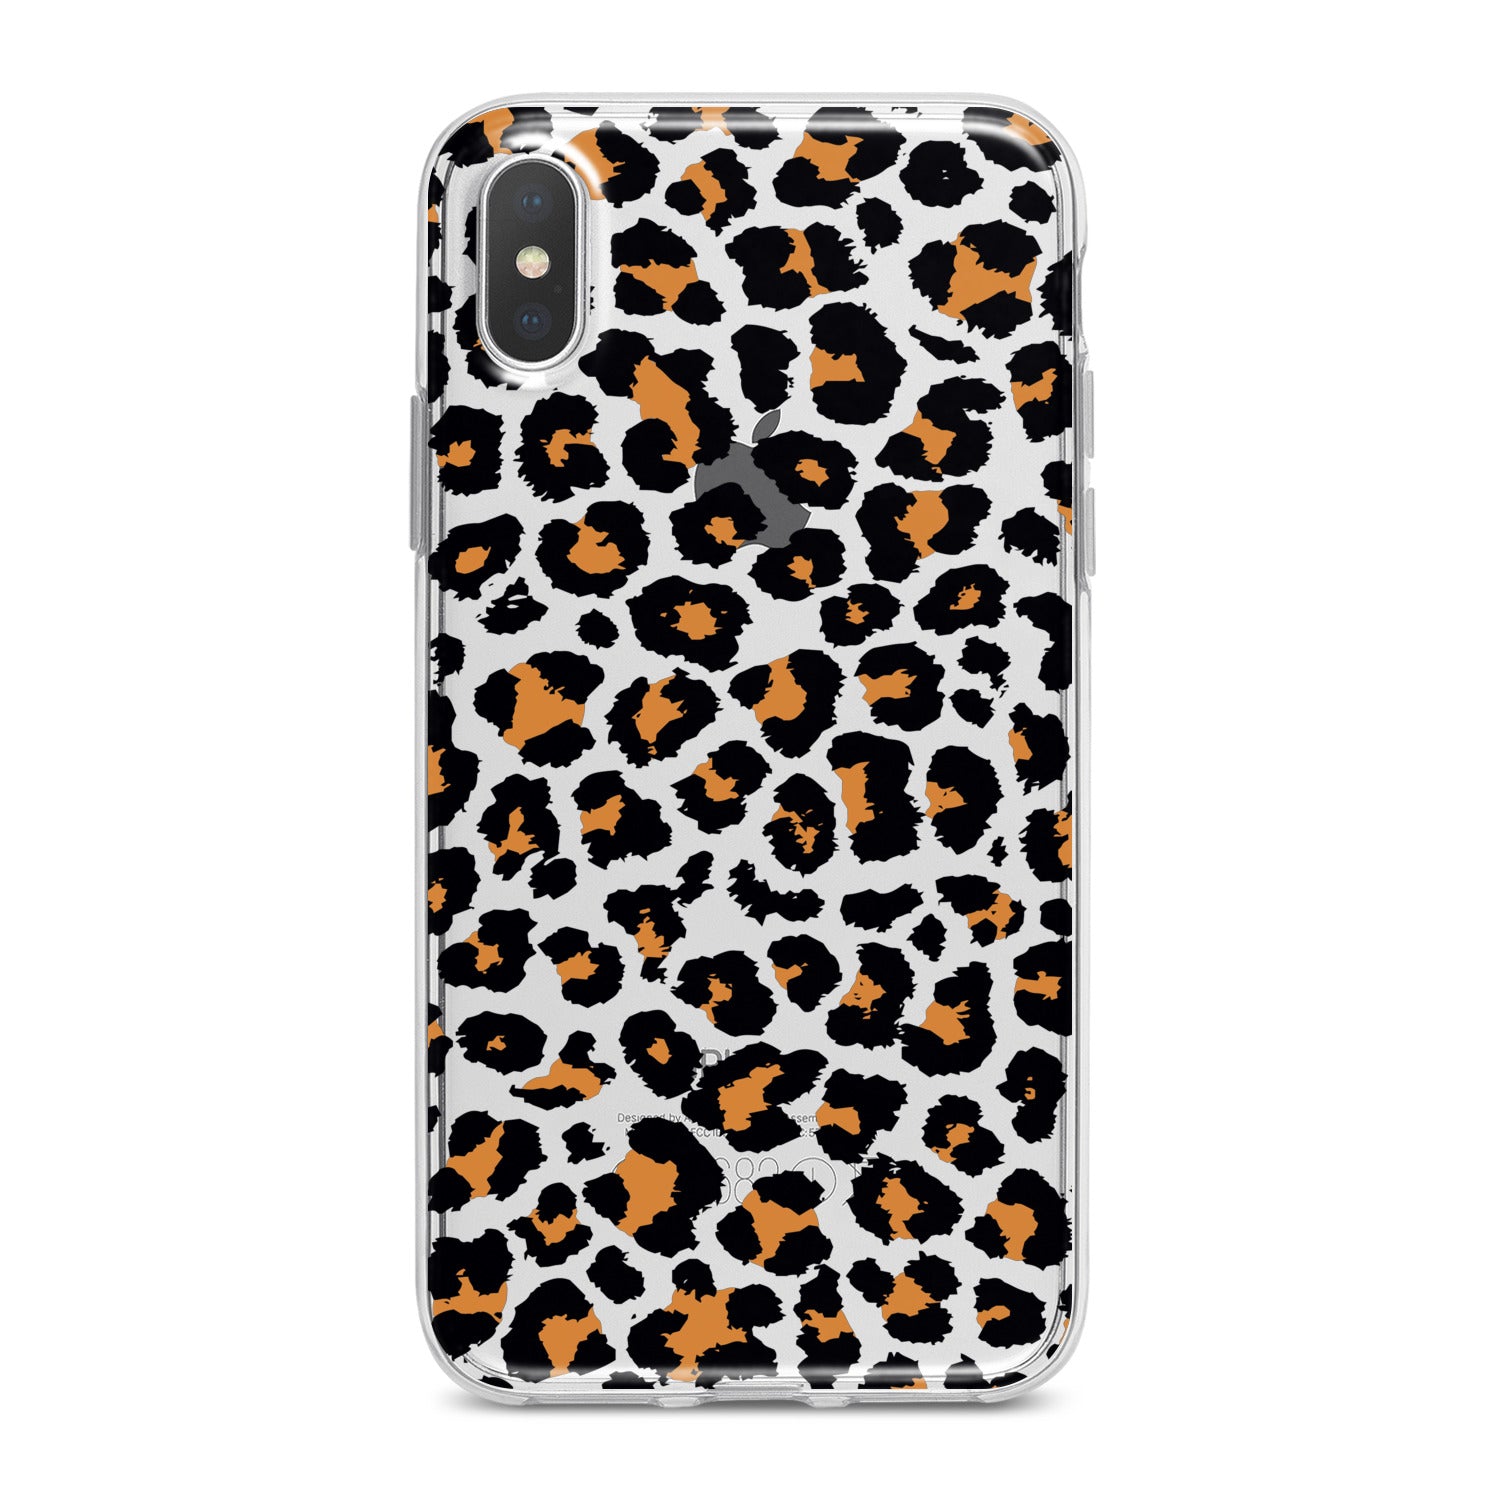 Lex Altern Leopard Pattern Phone Case for your iPhone & Android phone.